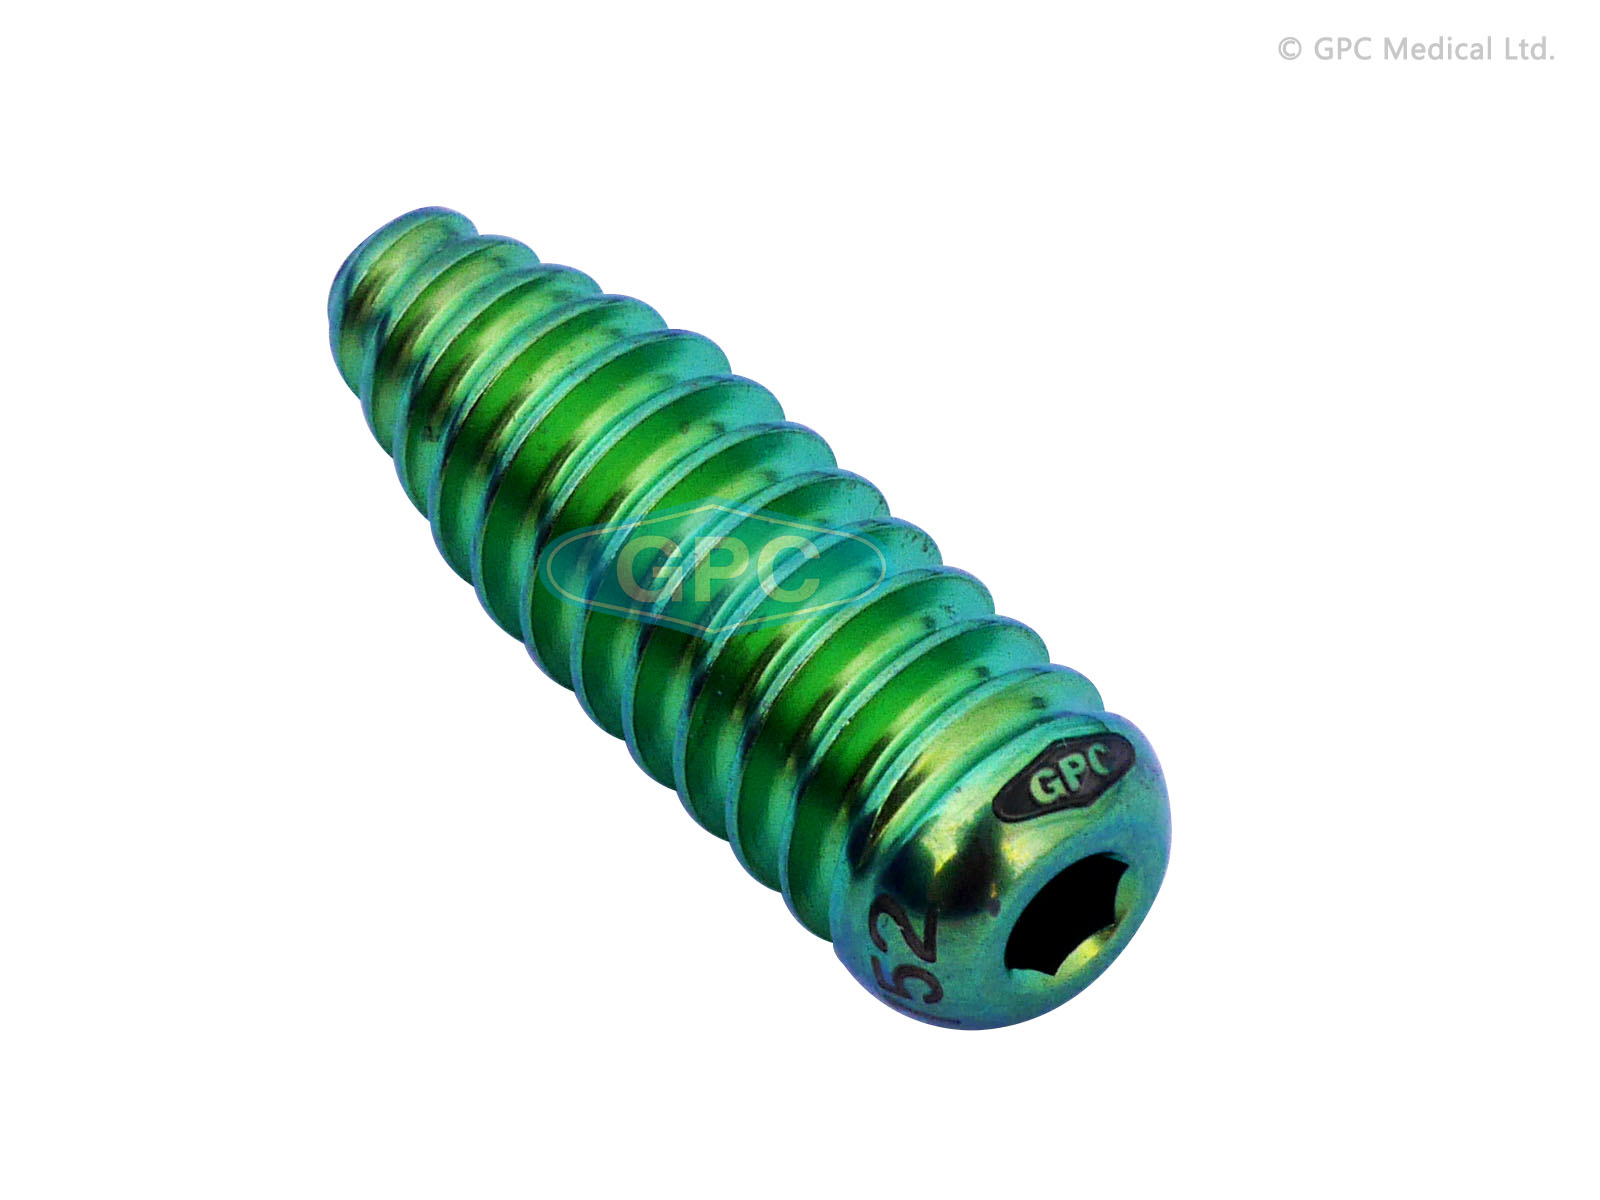 ACL Screw / Interference Screw